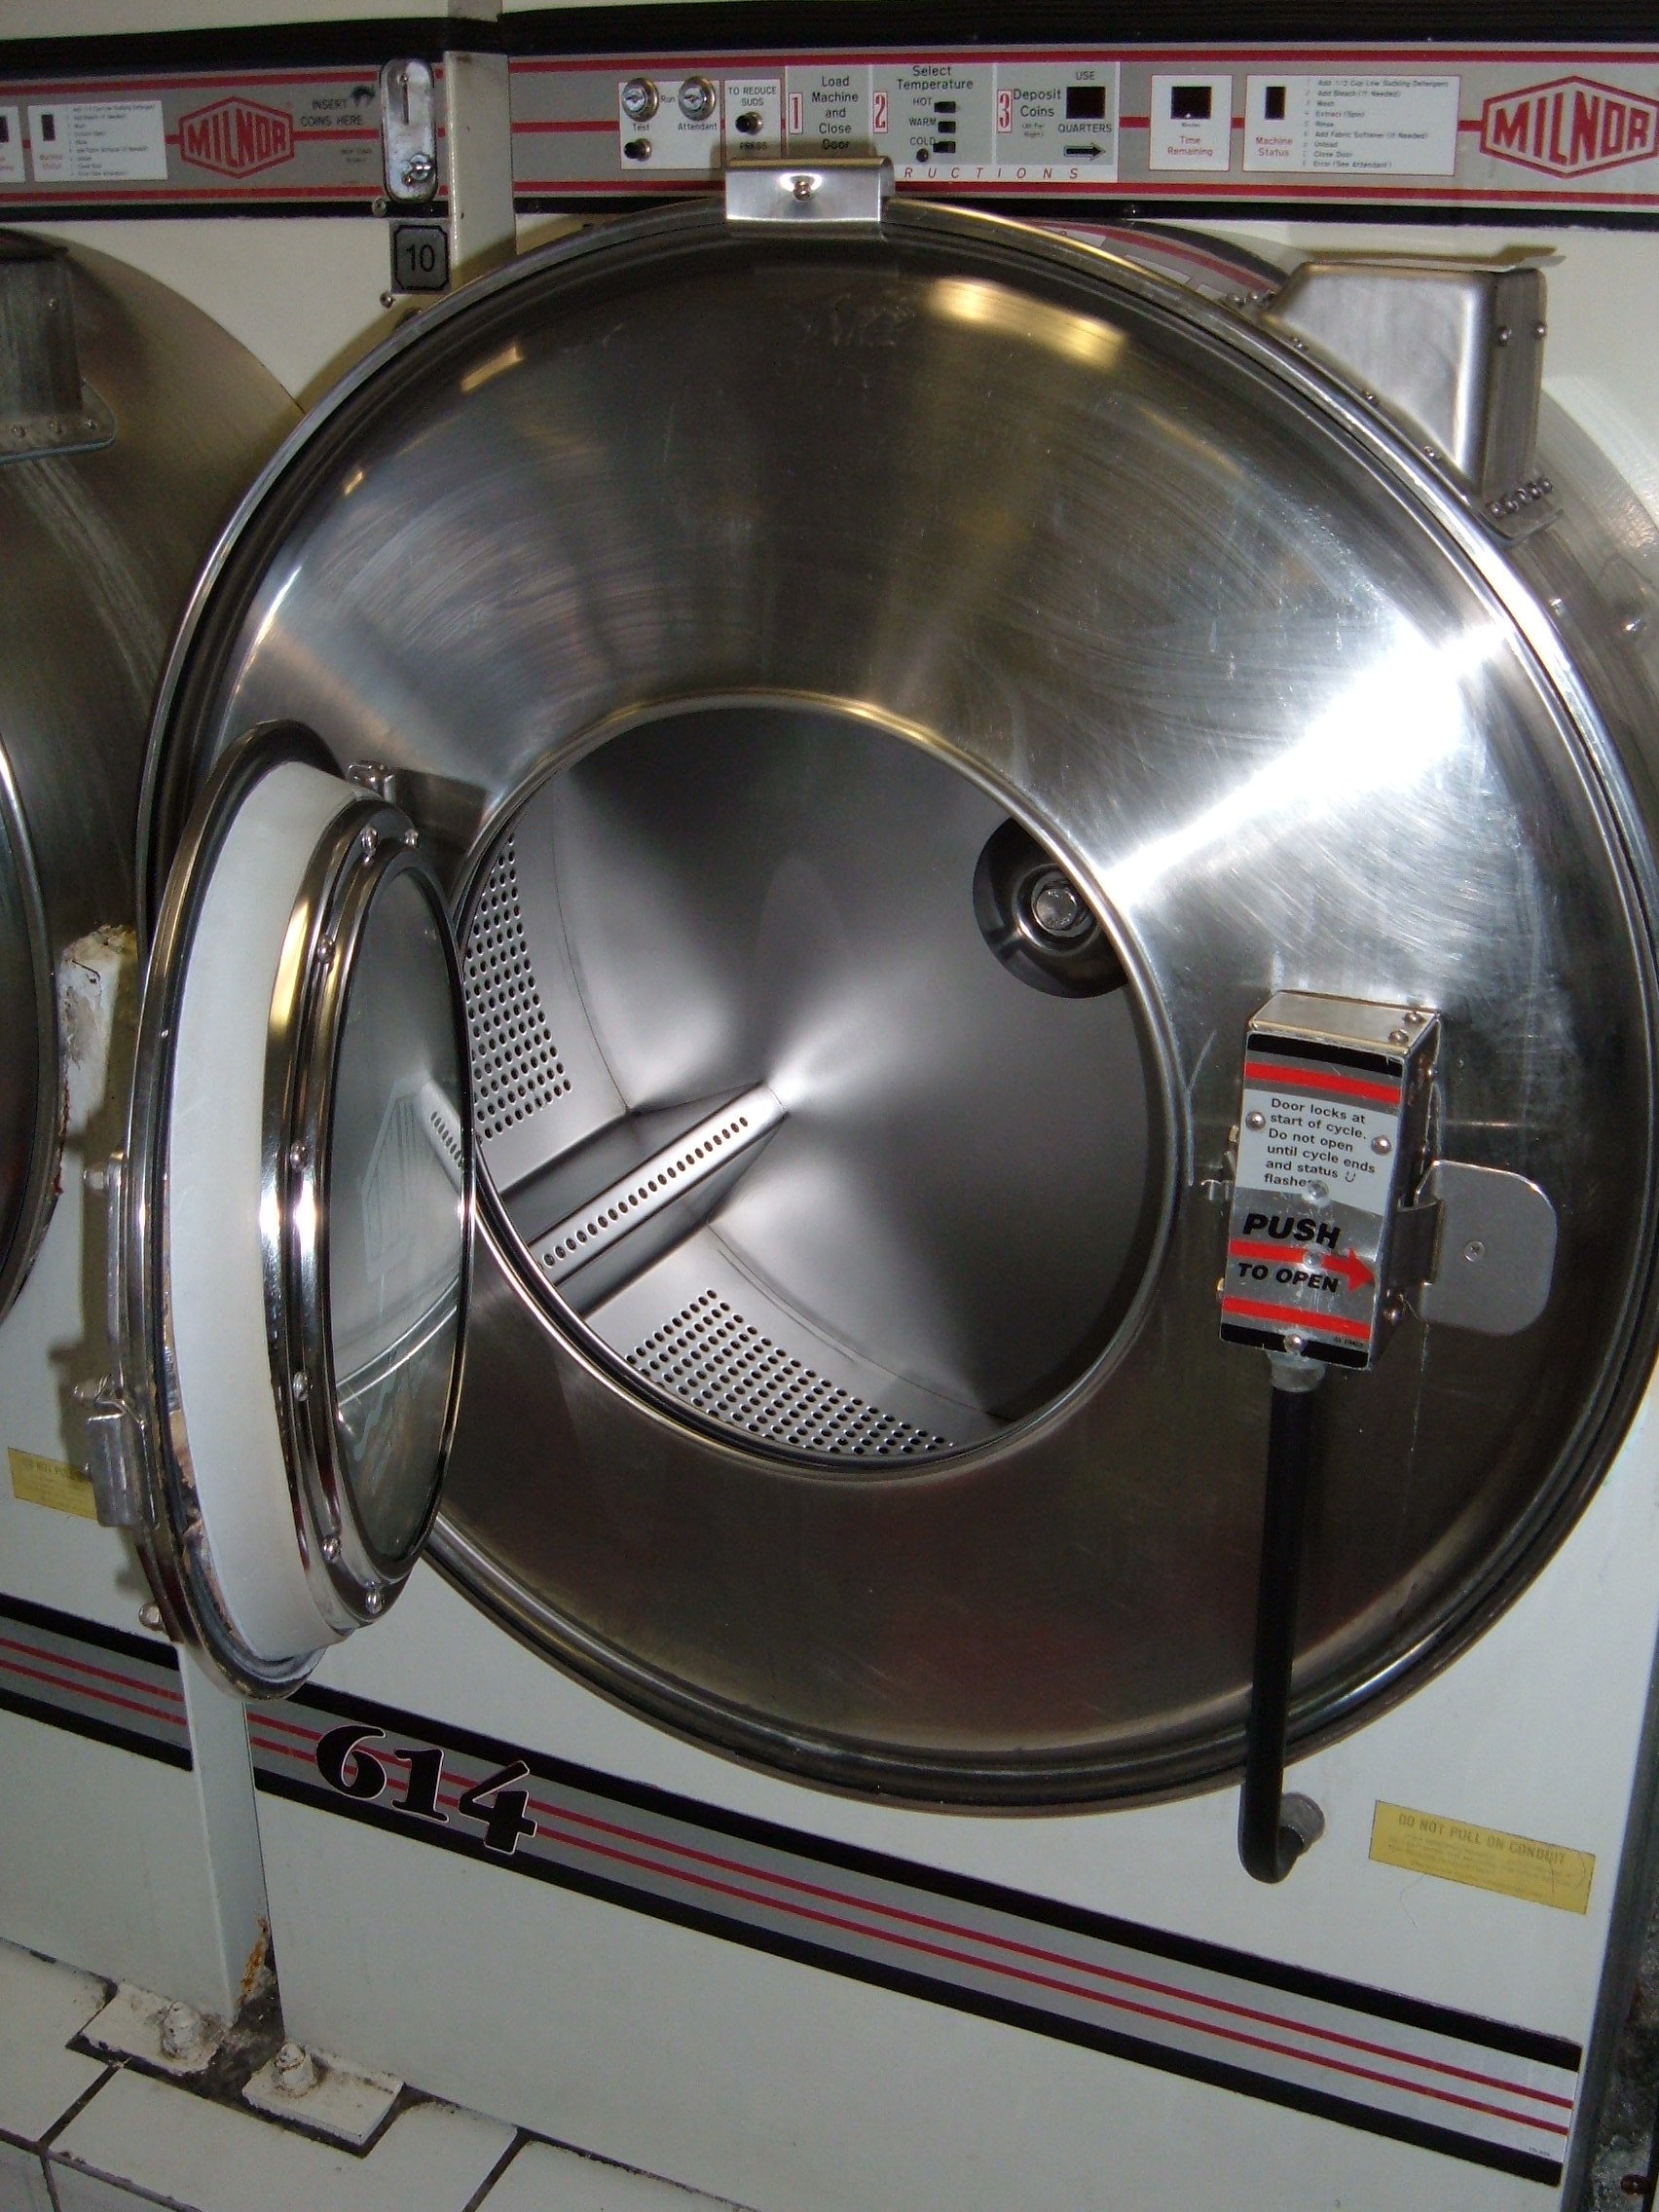 Milnor commercial washing machine